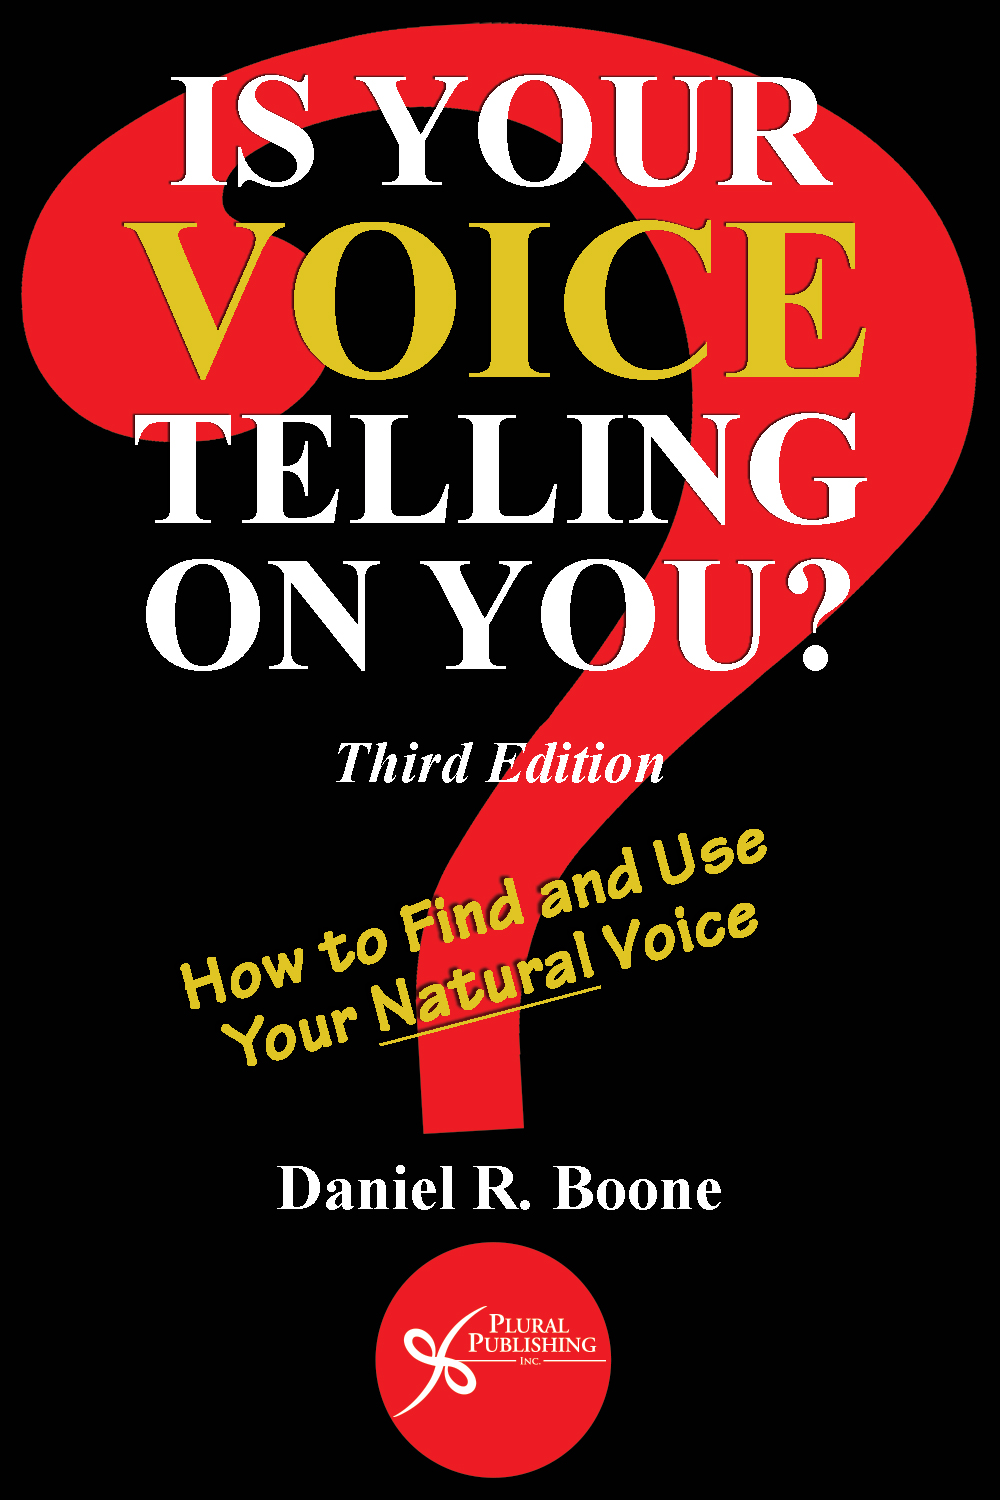 Is Your Voice Telling on You? book cover